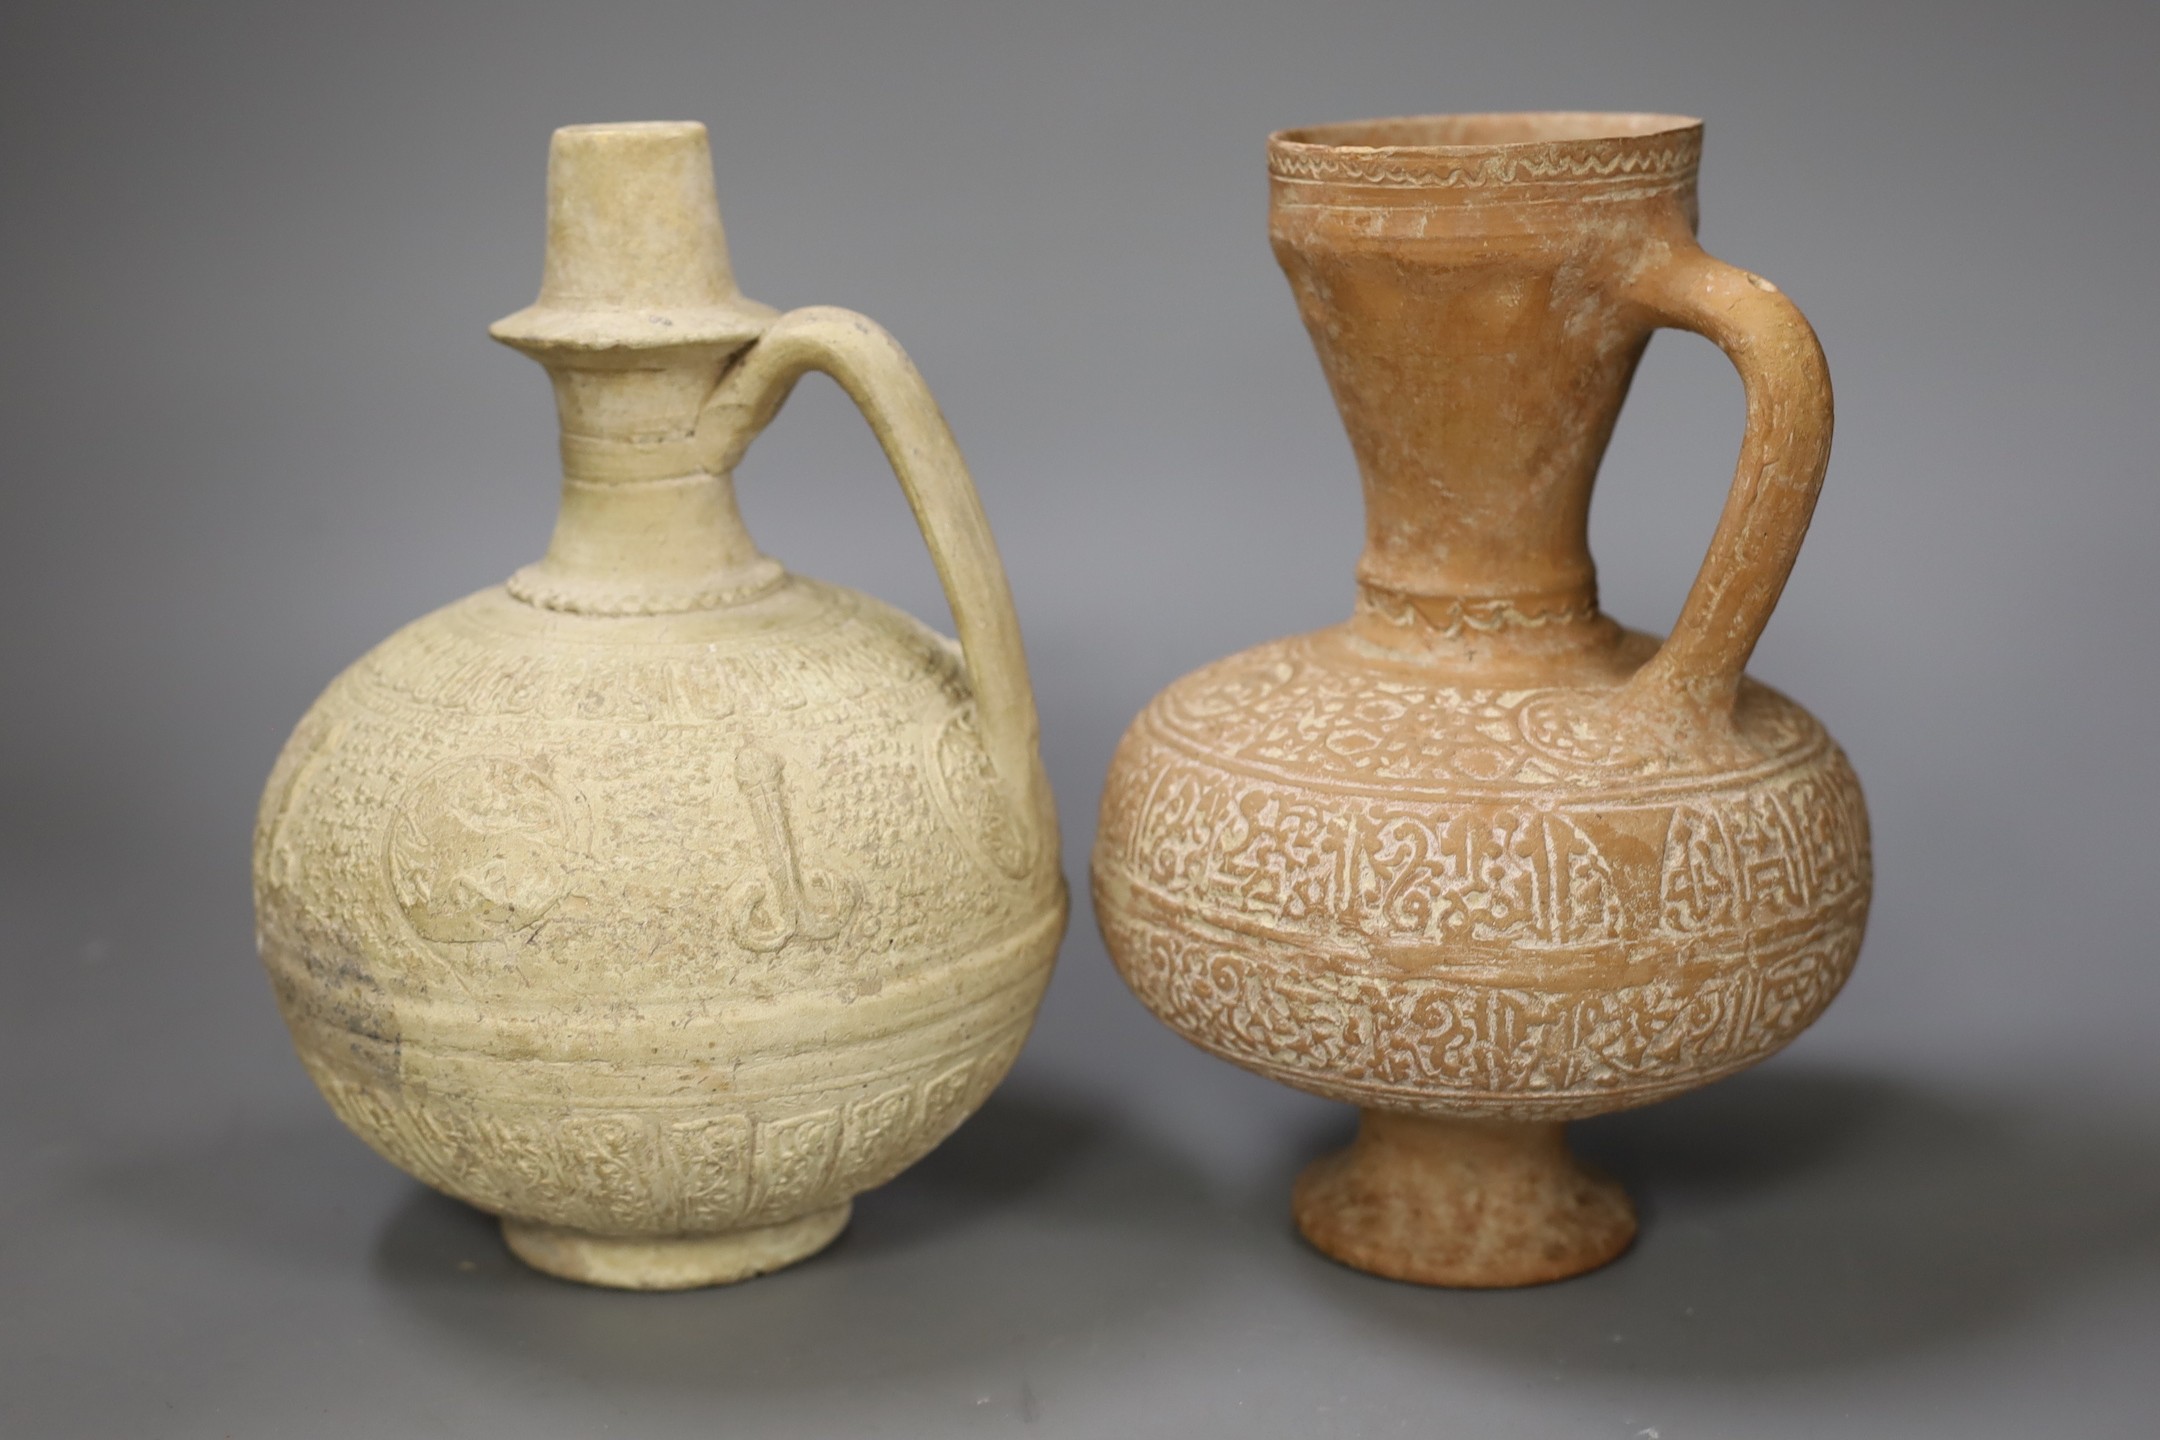 Four Islamic terracotta jugs, Middle Eastern possibly, 12th century, tallest 26cm